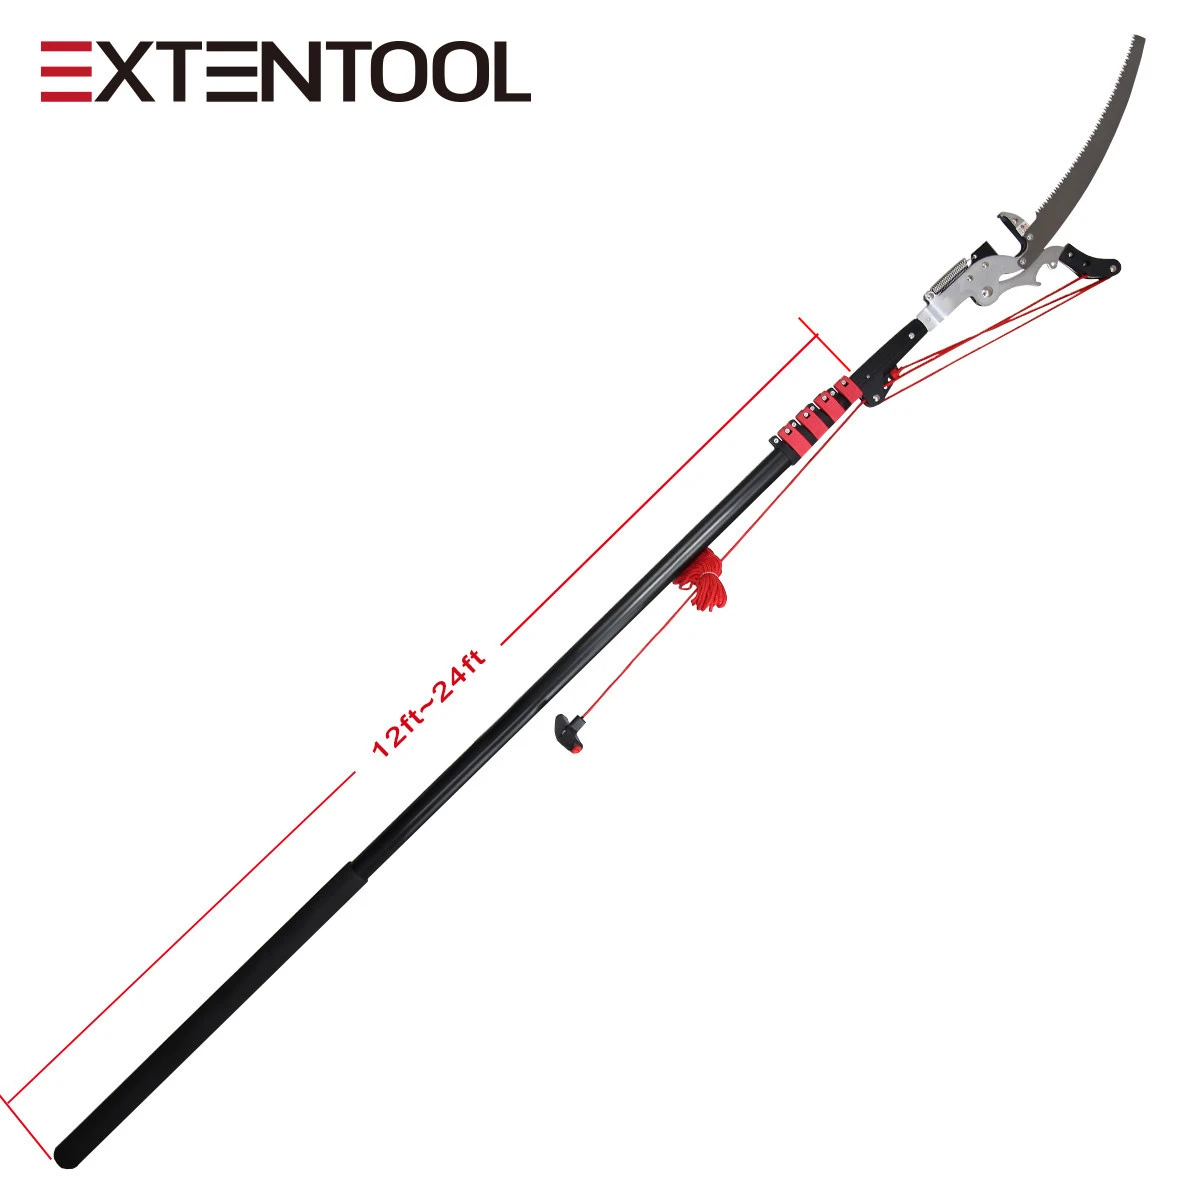 Extentool 24 feet Long handle telescopic pruning shears for tree pruner saw in hand garden tools